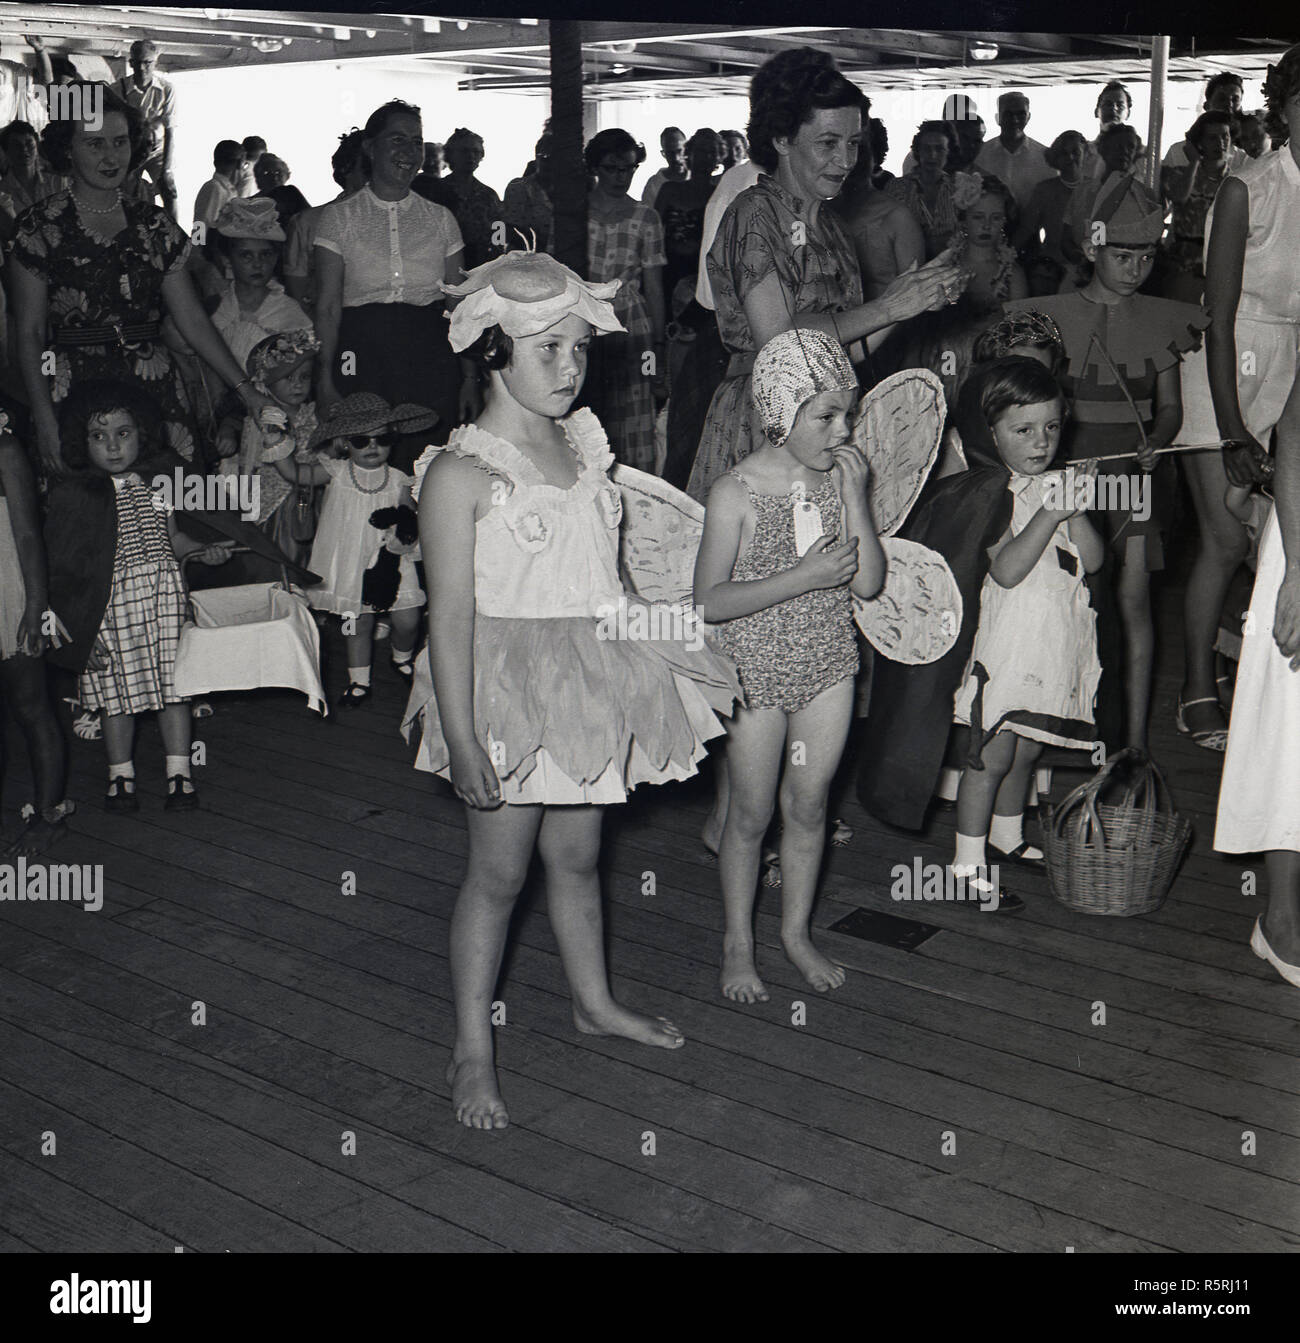 1950s, historical, on-board the union-castle steamship, a childrens fancy dress party taking place, watched by parents and other passengers. Stock Photo